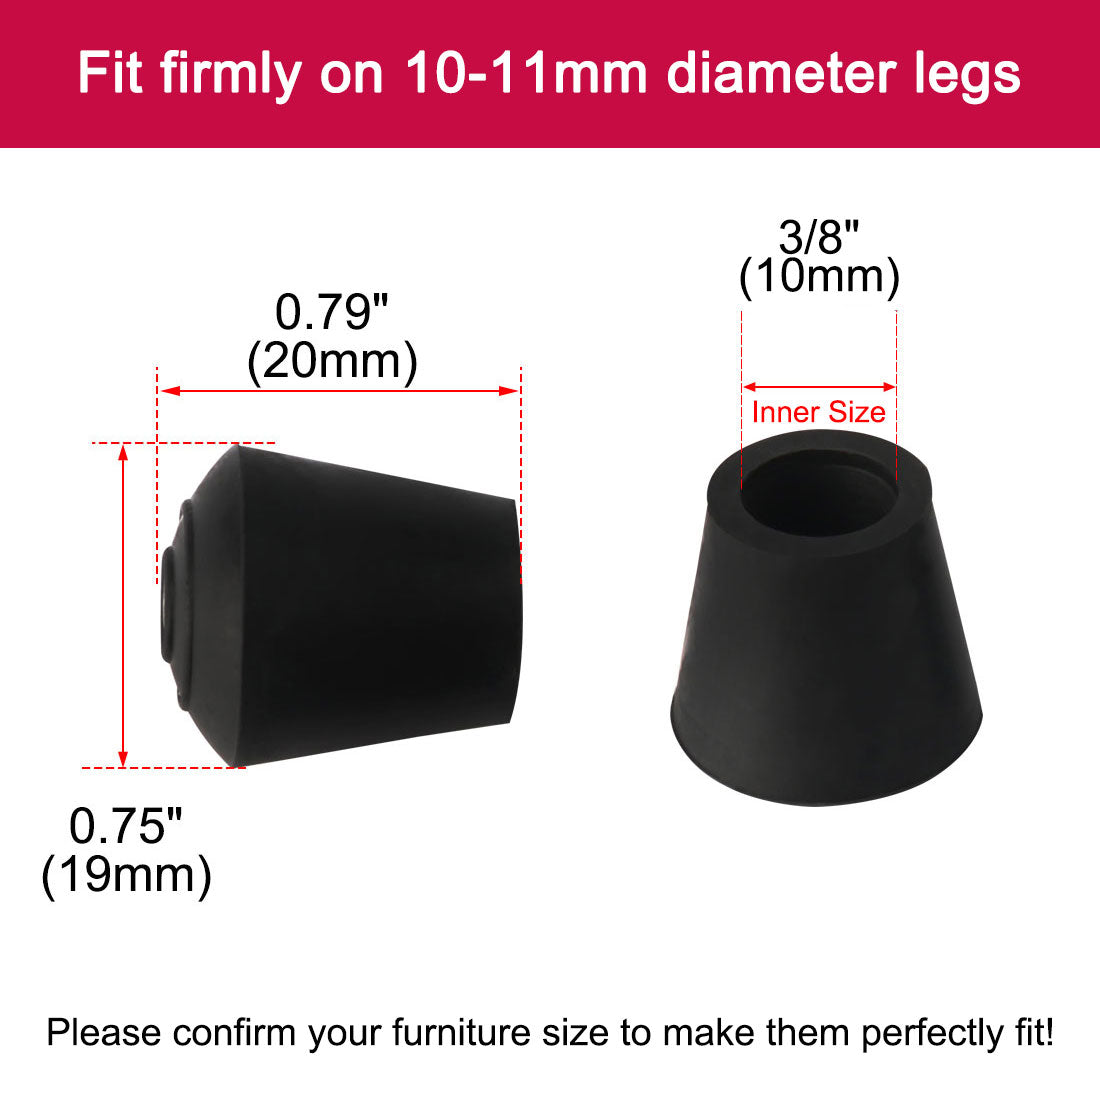 uxcell Uxcell Rubber Leg Cap Tip Cup Feet Cover 9.5mm Inner Dia 18pcs for Furniture Chair